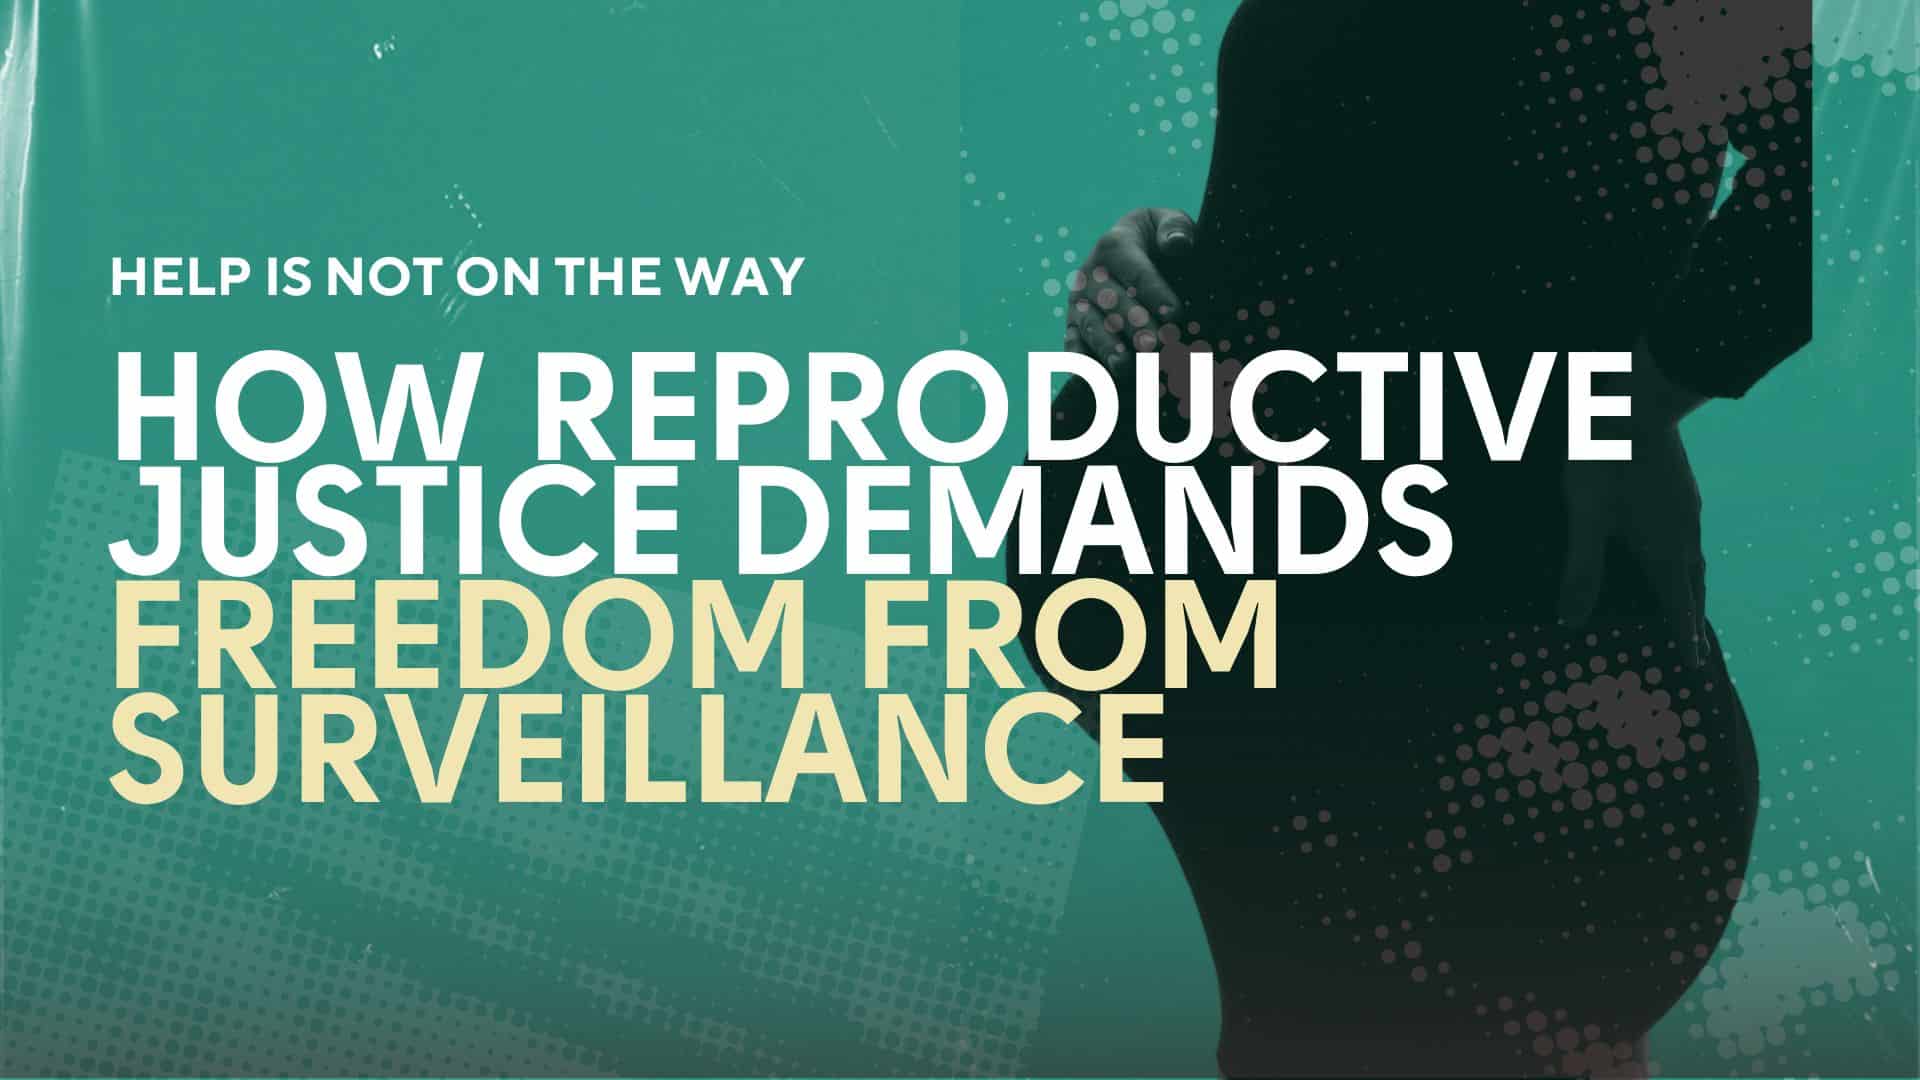 How Reproductive Justice Demands Freedom from Surveillance